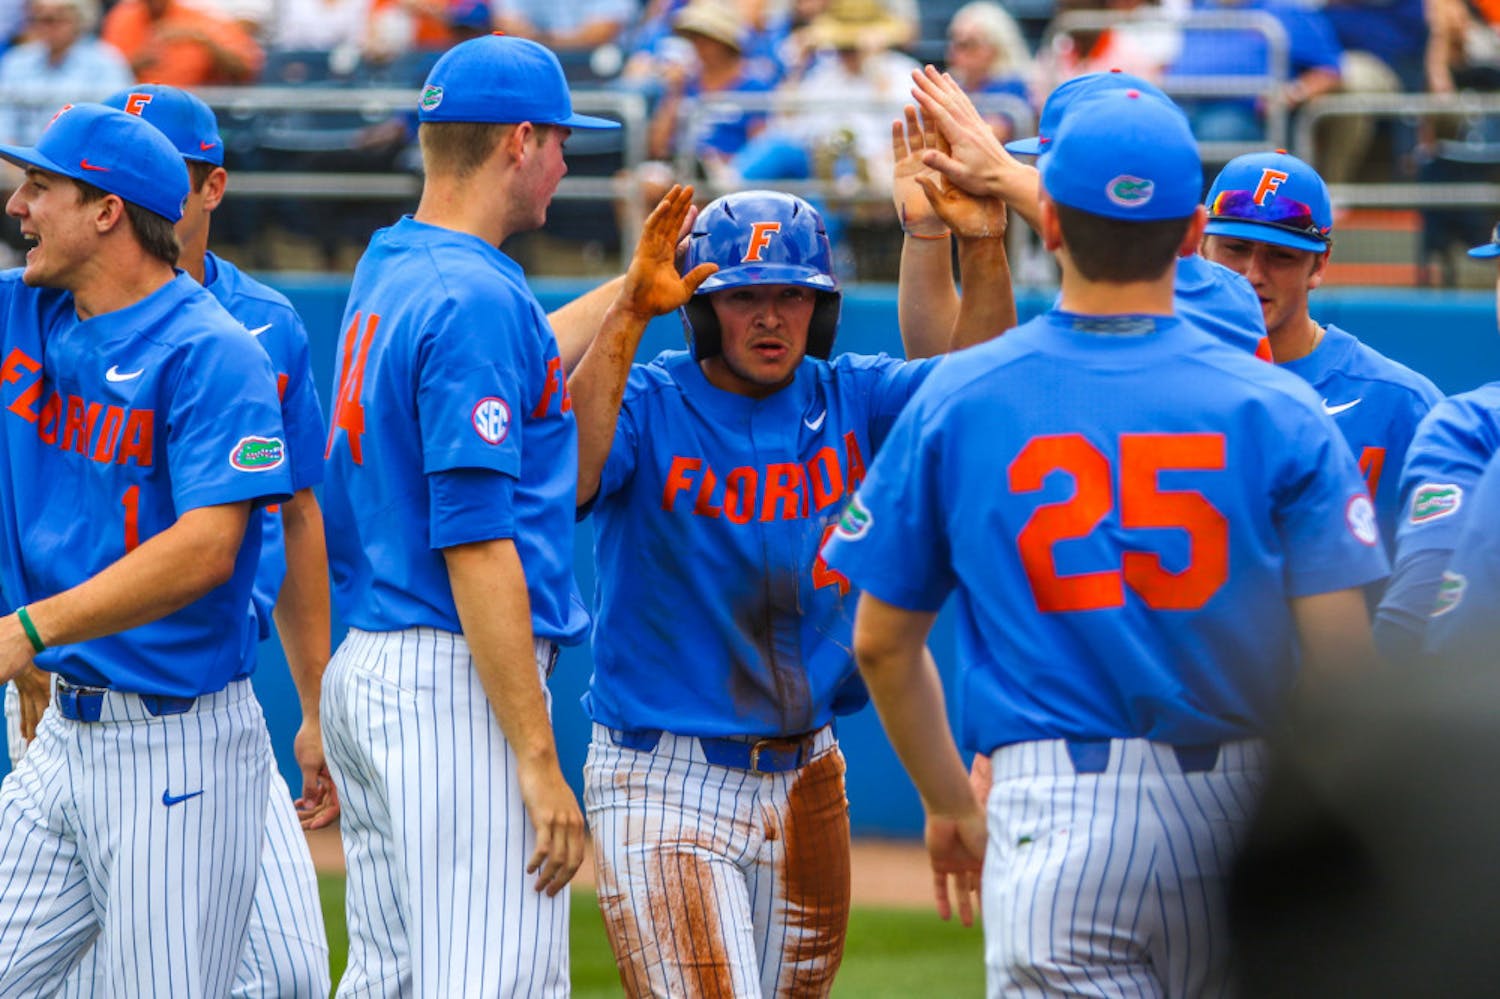 UF rallied from a five-run deficit to defeat Stetson 10-7